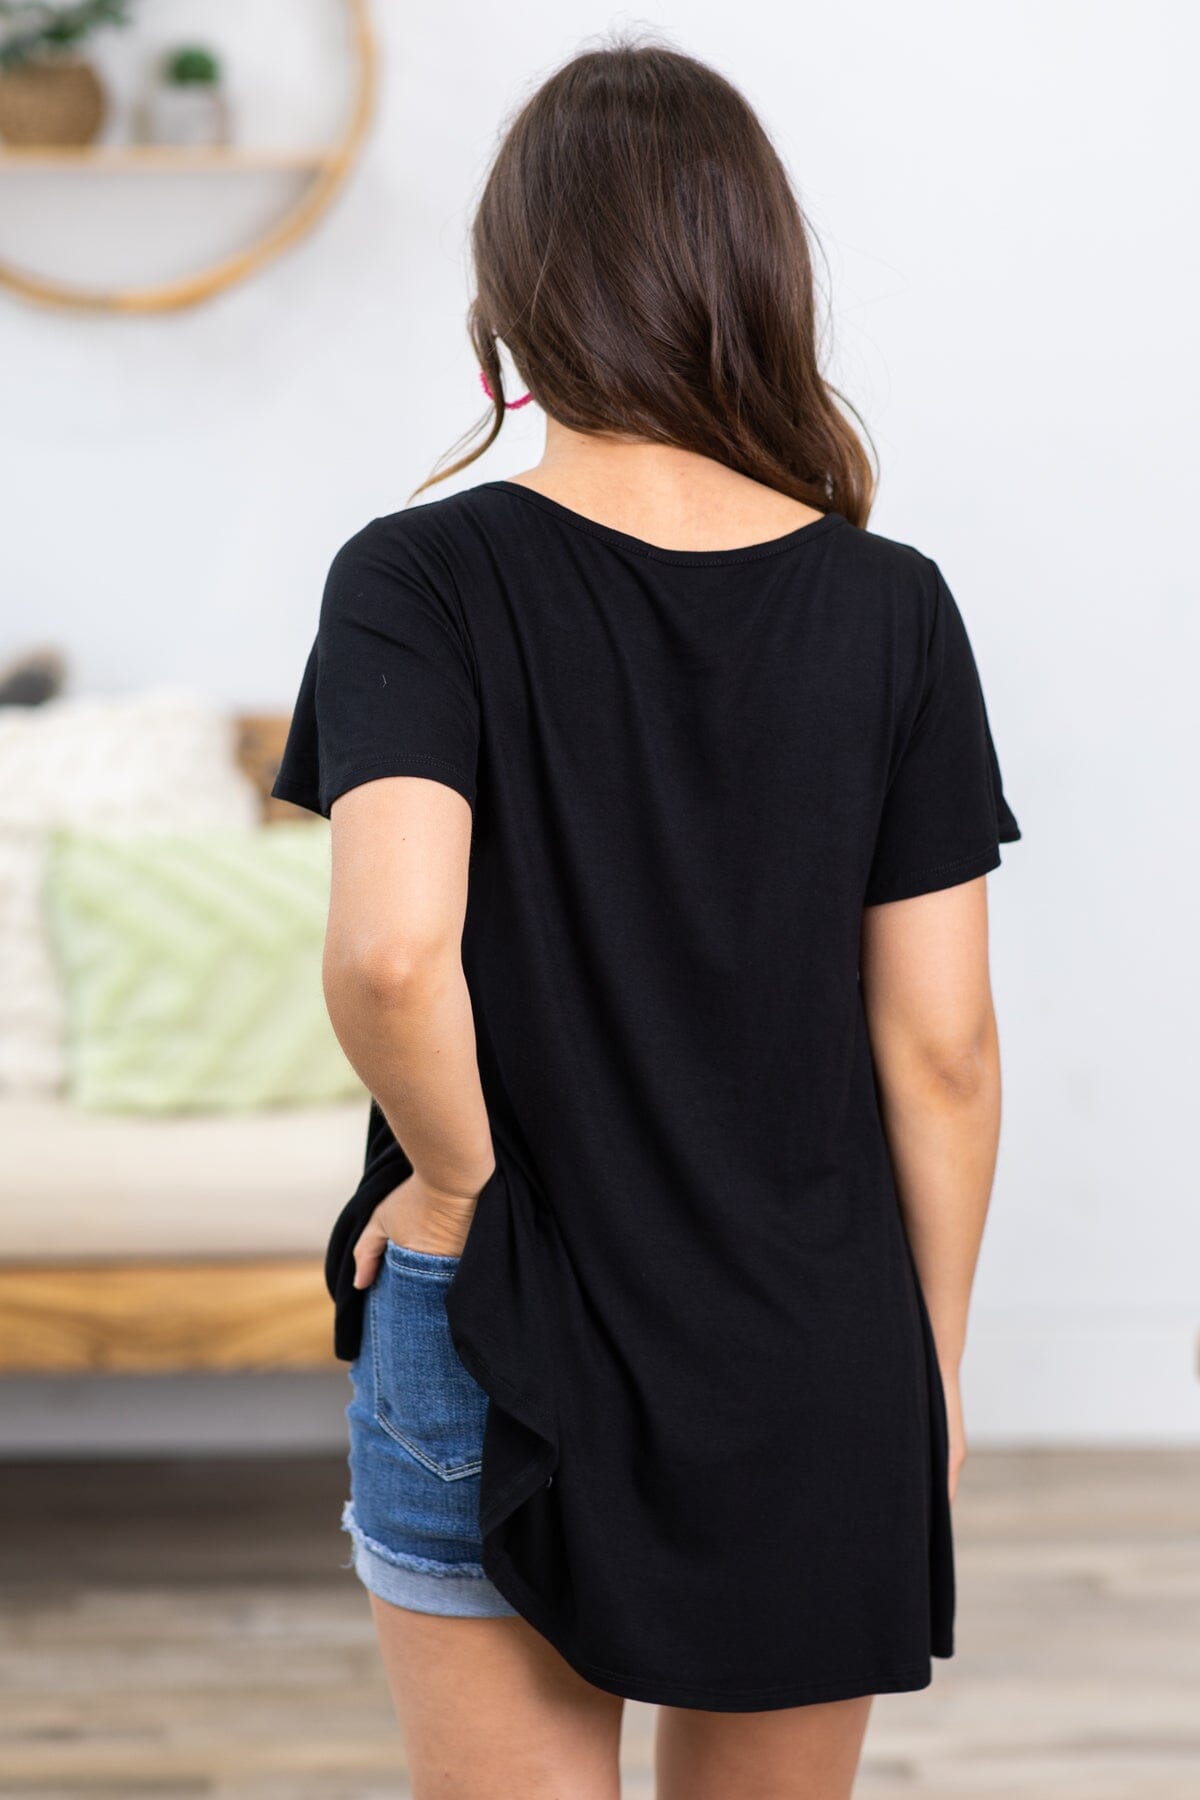 Black Short Sleeve Top With Criss-Cross Detail - Filly Flair